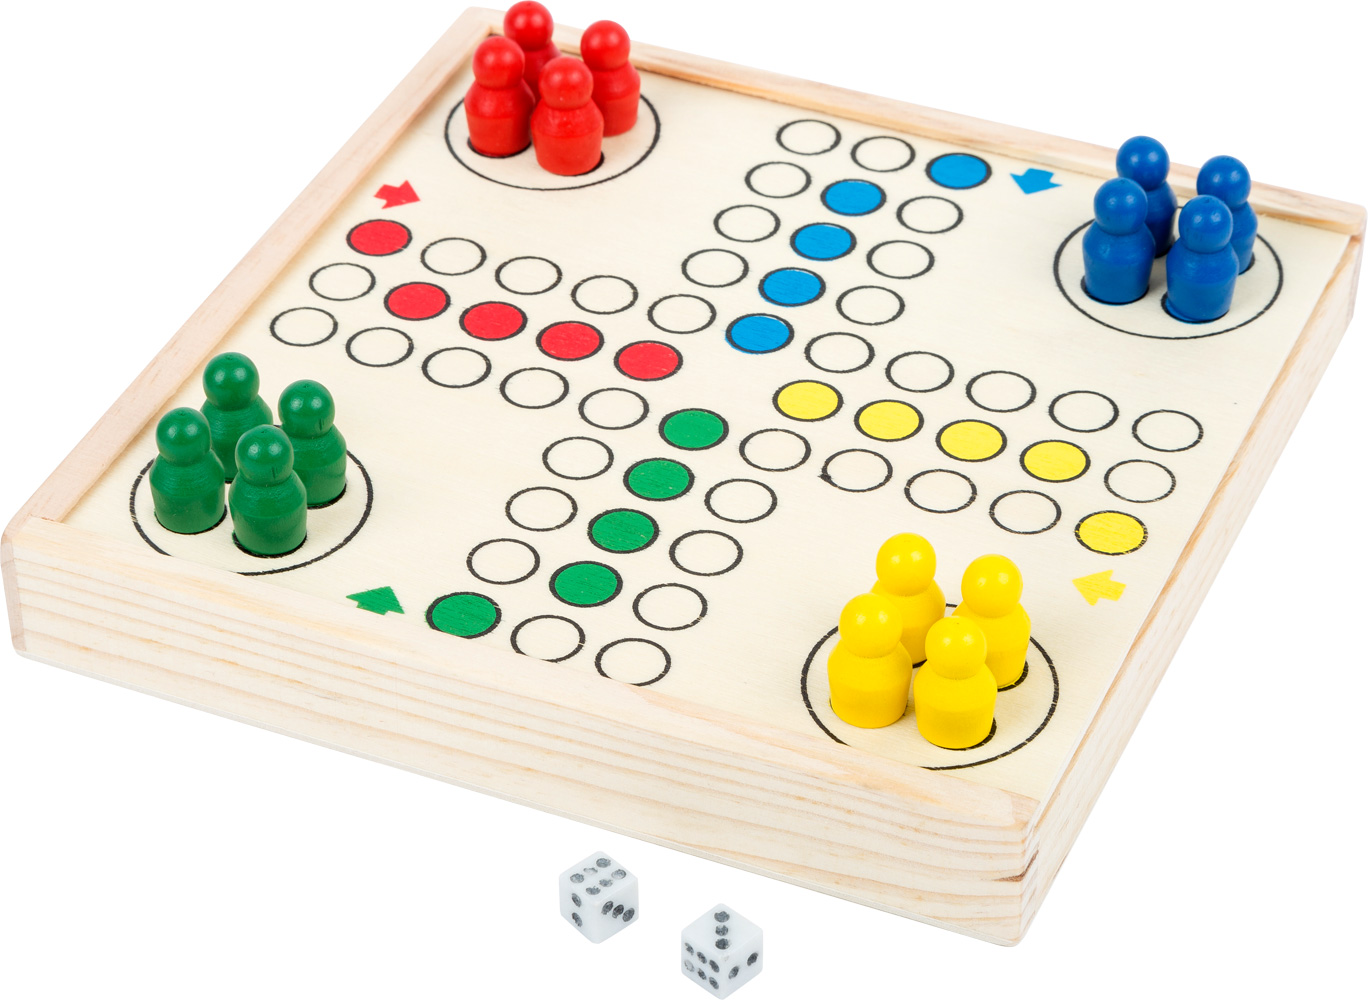 Ludo Games: Play Ludo Games on LittleGames for free